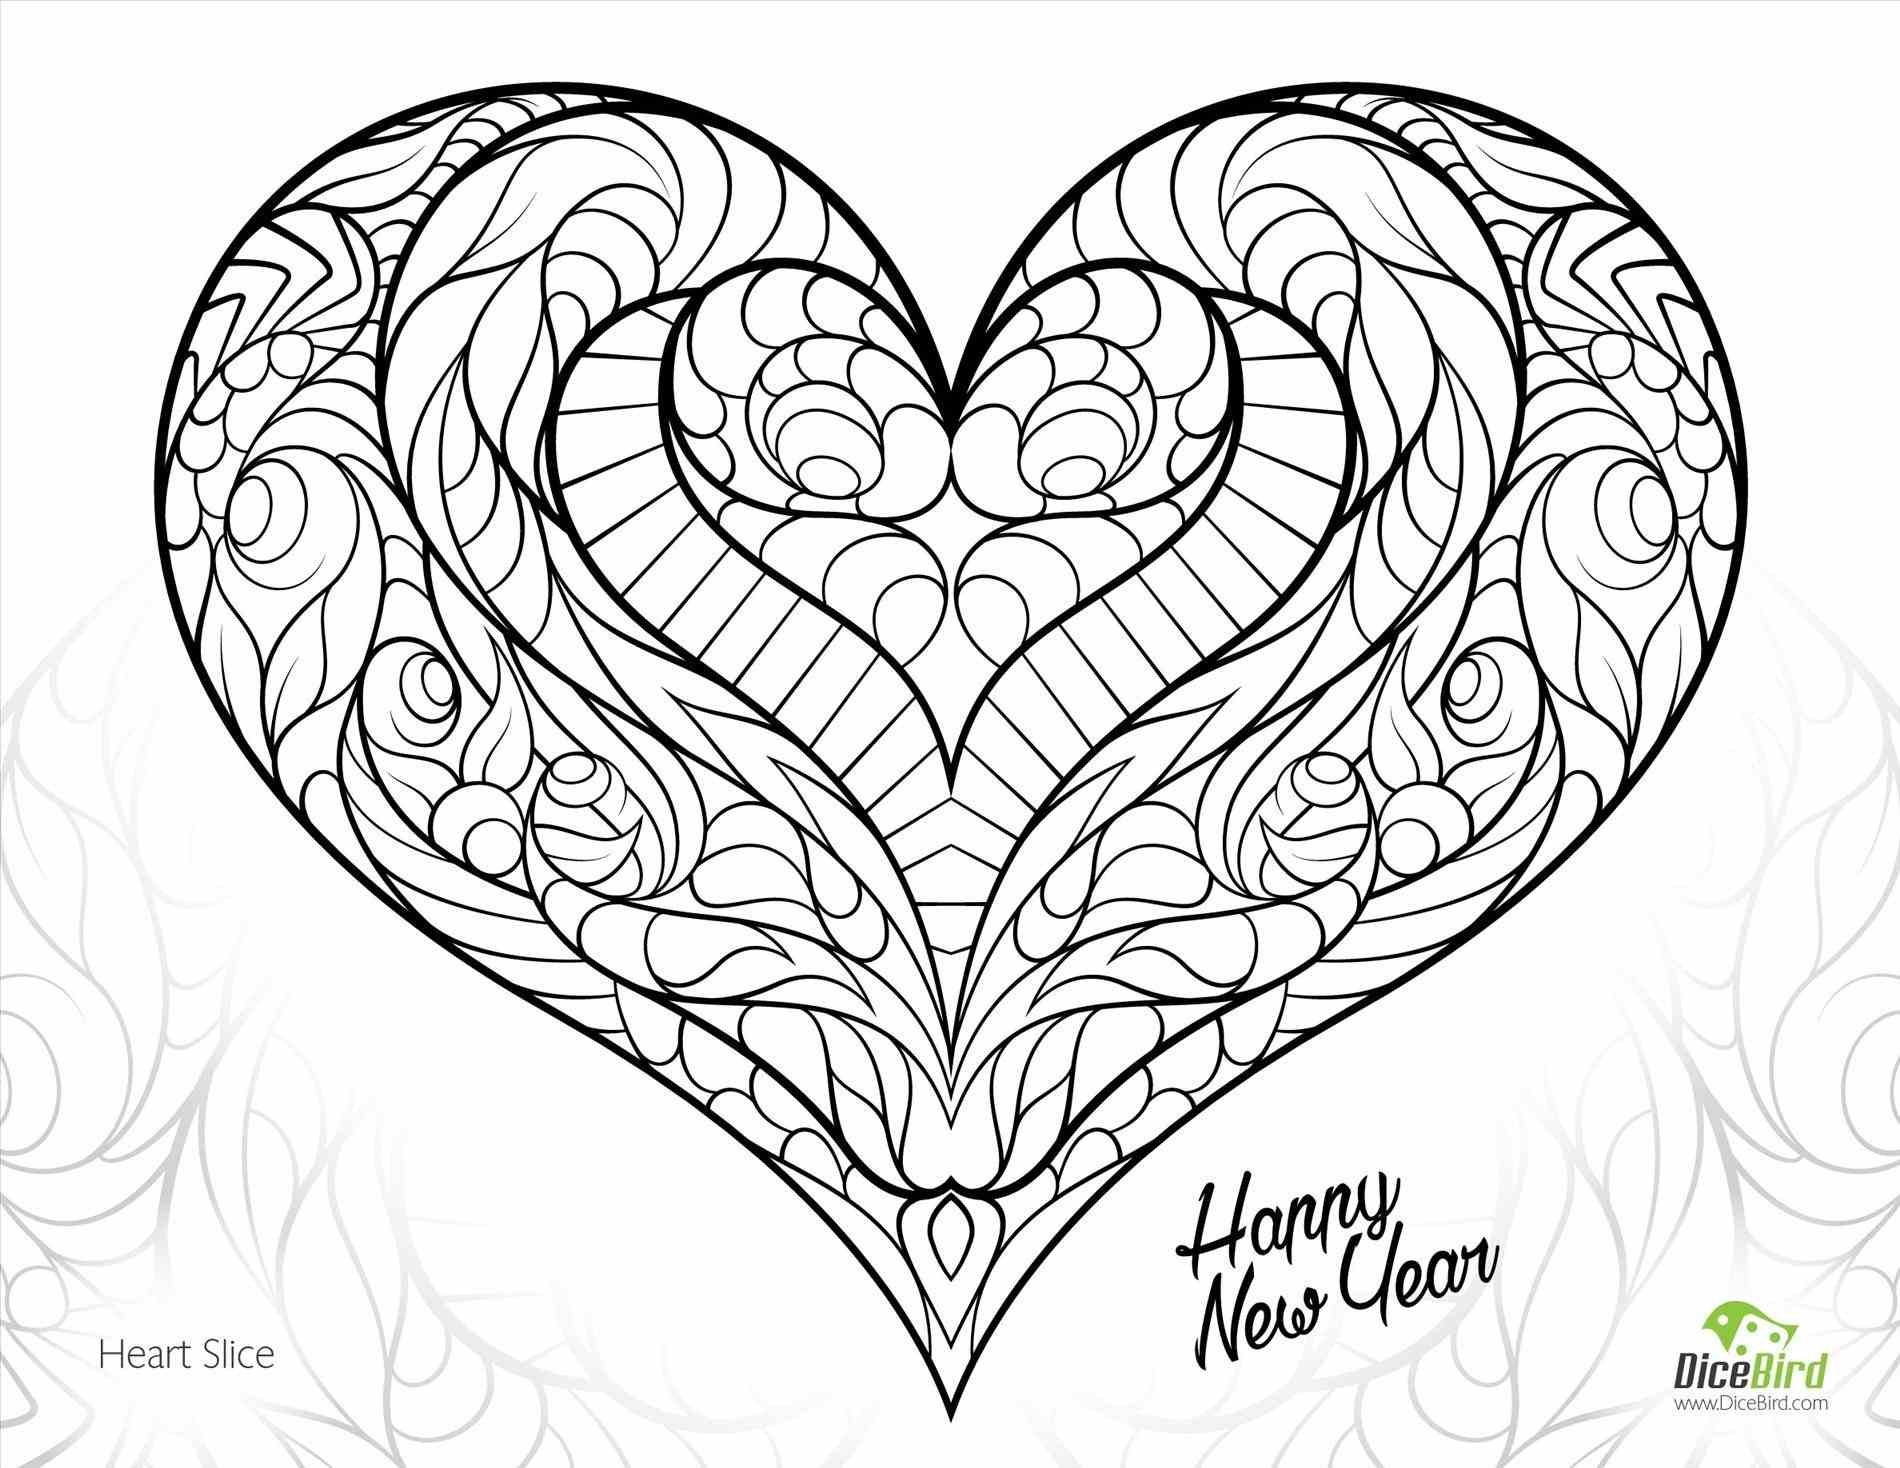 Coloring Pages Of Hearts With Wings And Roses at GetColorings.com